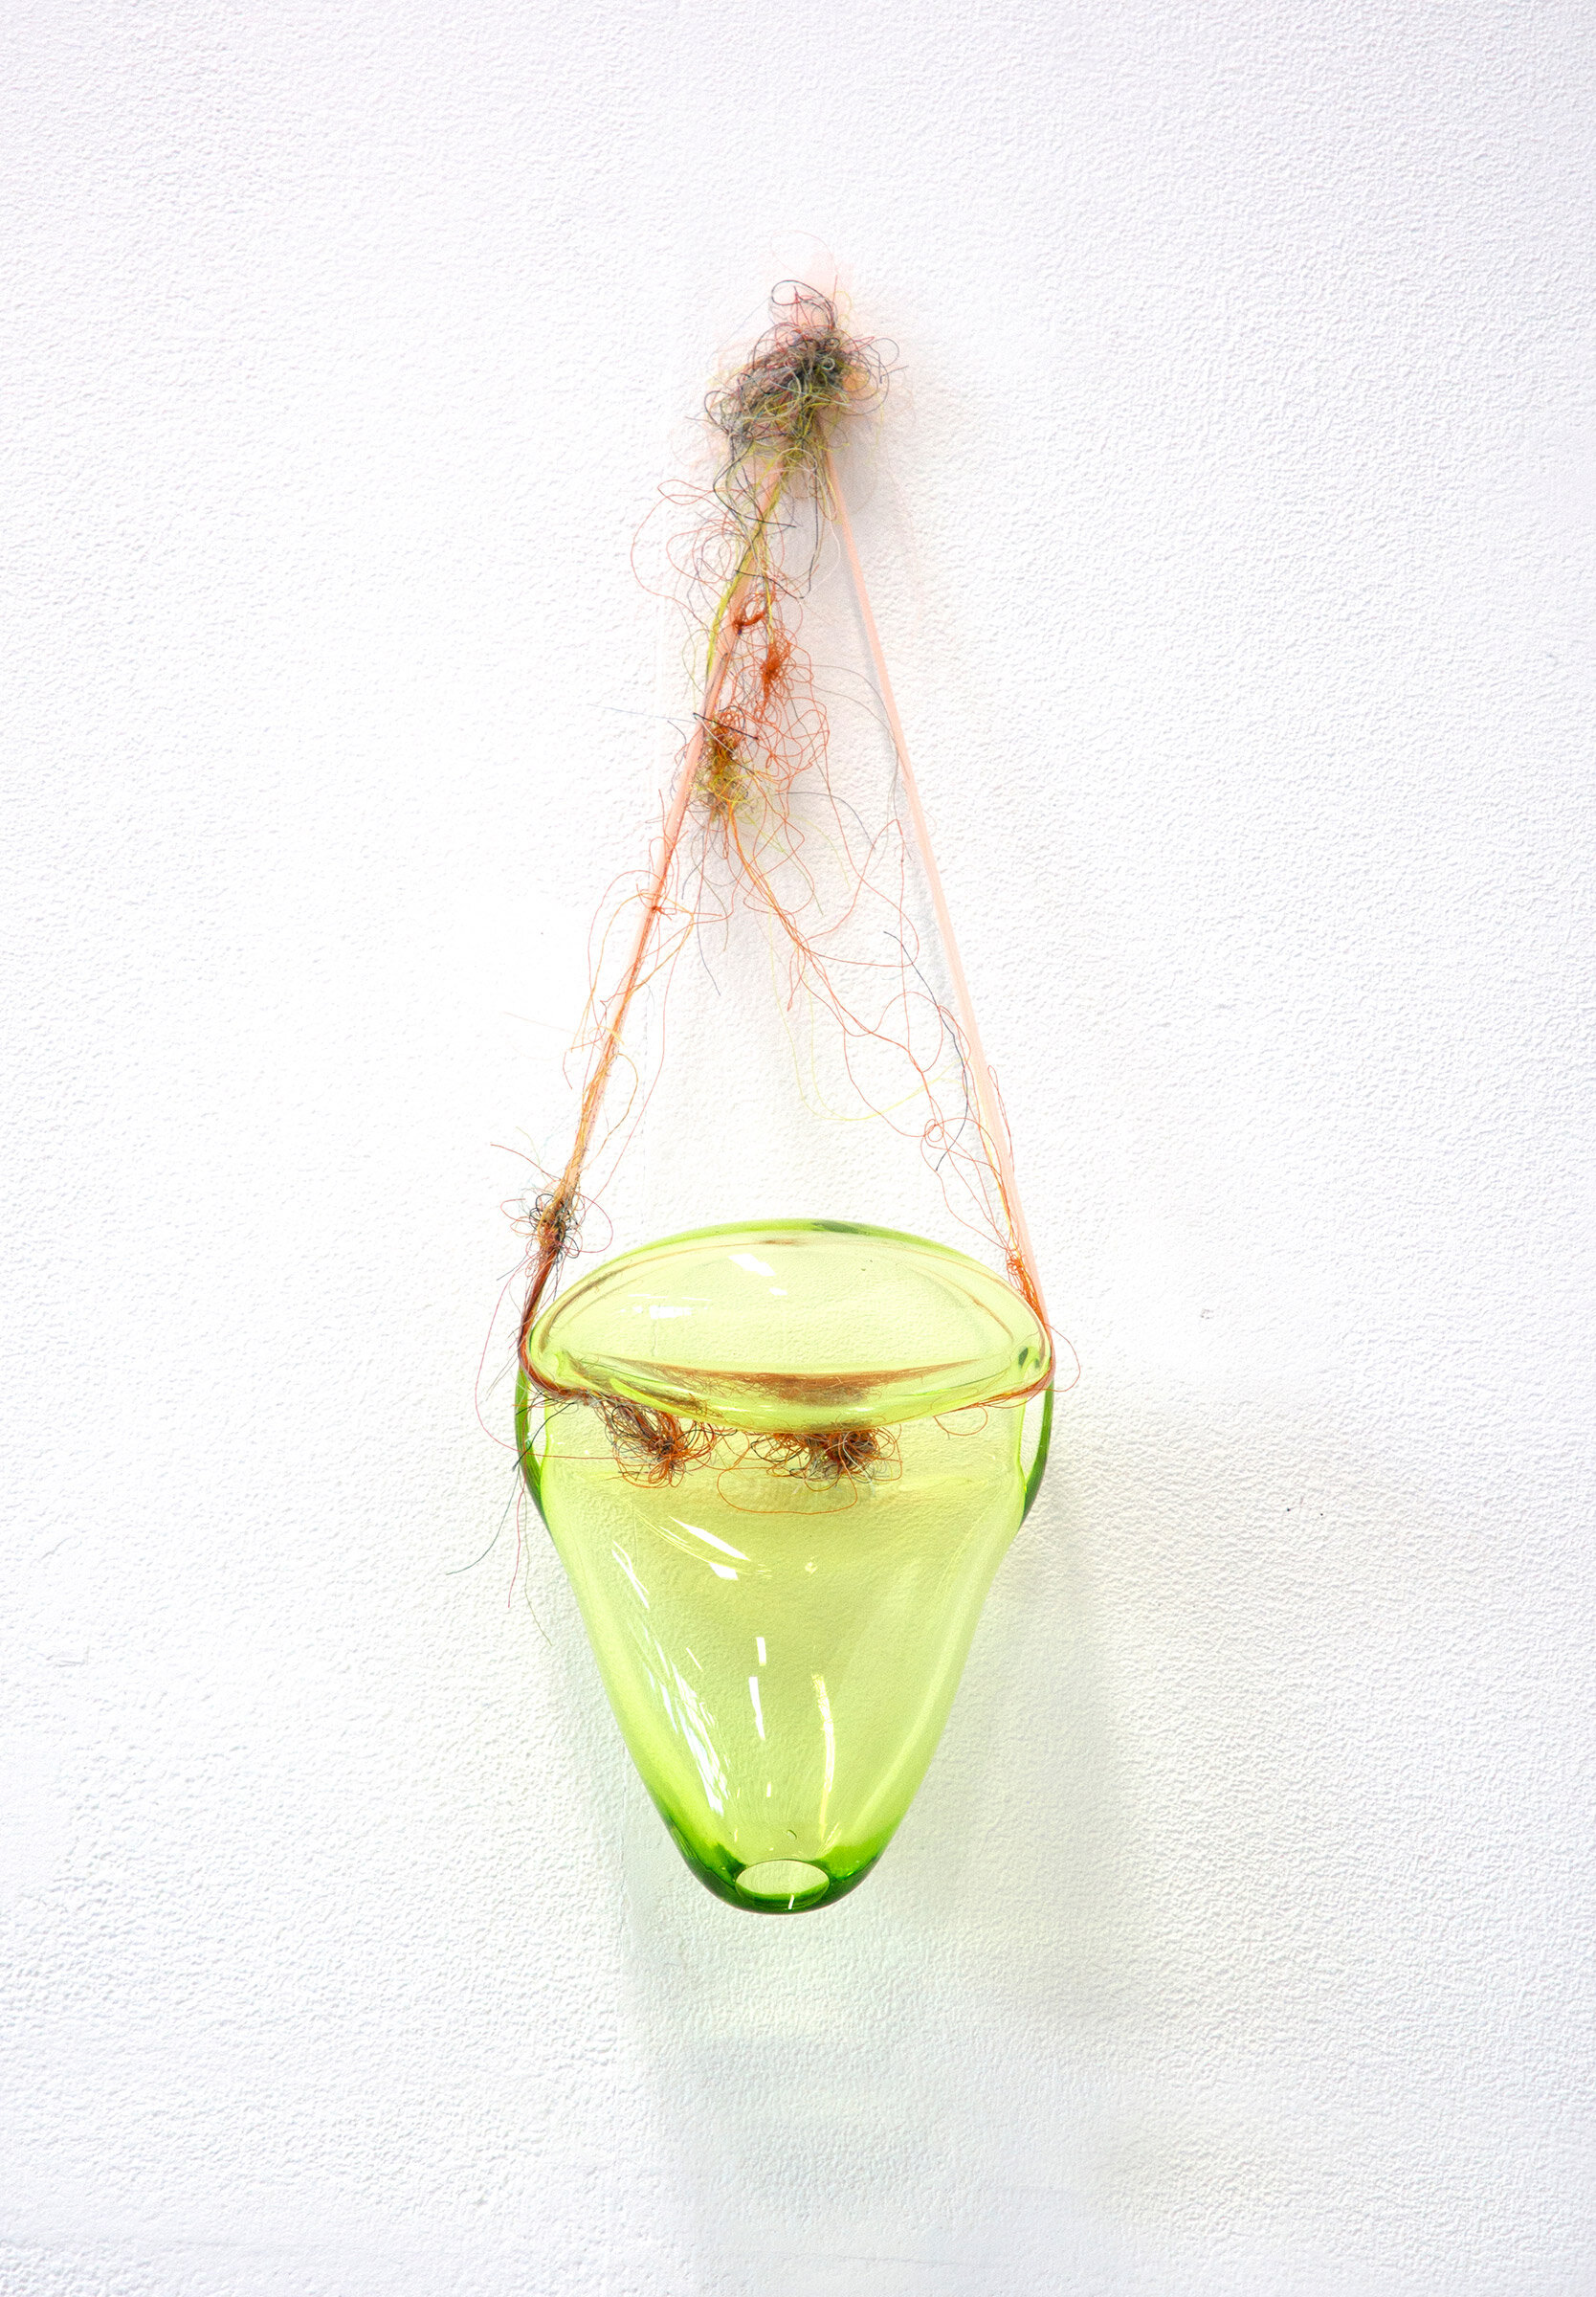  Kelly M O’Brien,  Hold the Emotional Space.  Glass, tulle, thread. 54 x 16 x 12 cm ©2019 